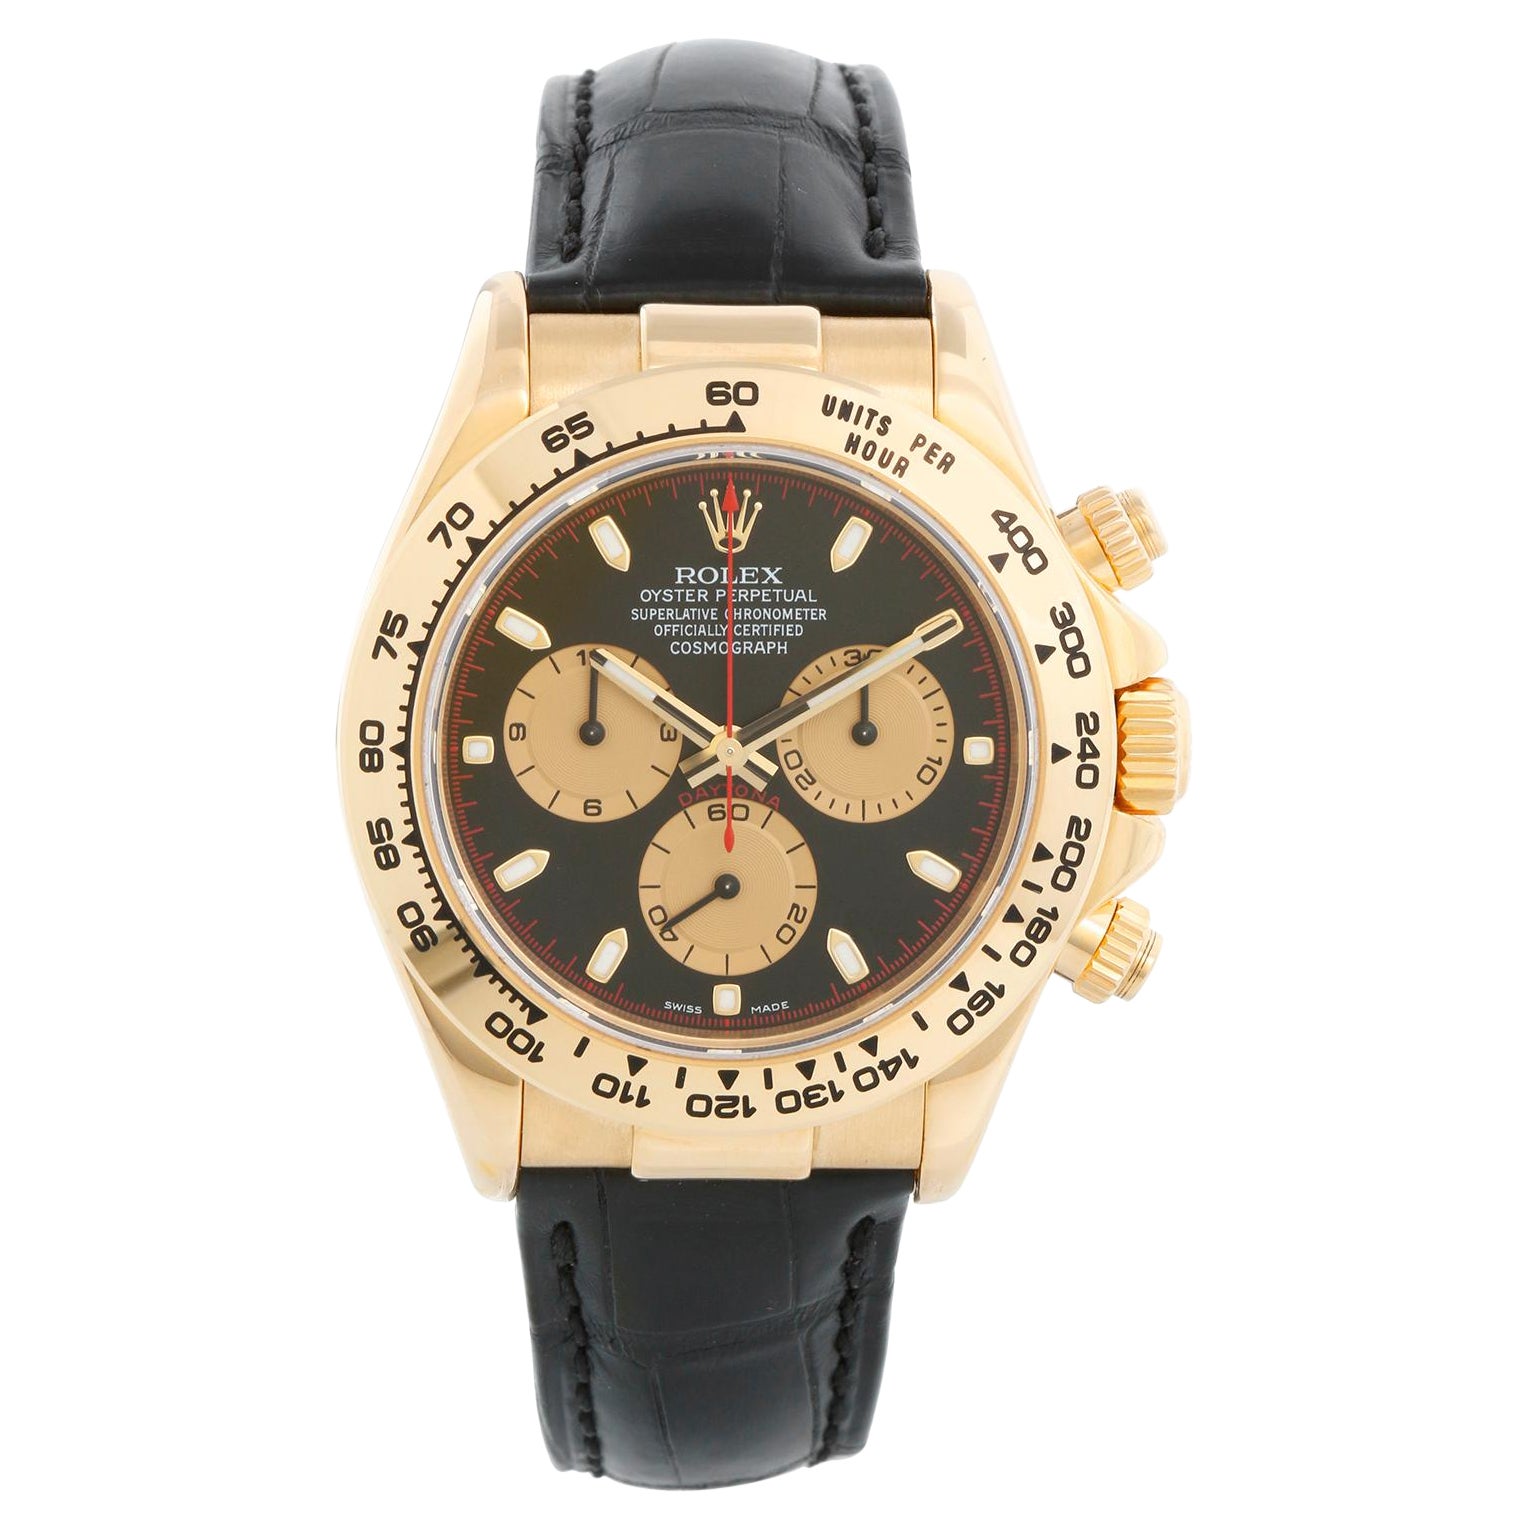 Rolex Cosmograph Daytona with Paul Newman dial Model 116518